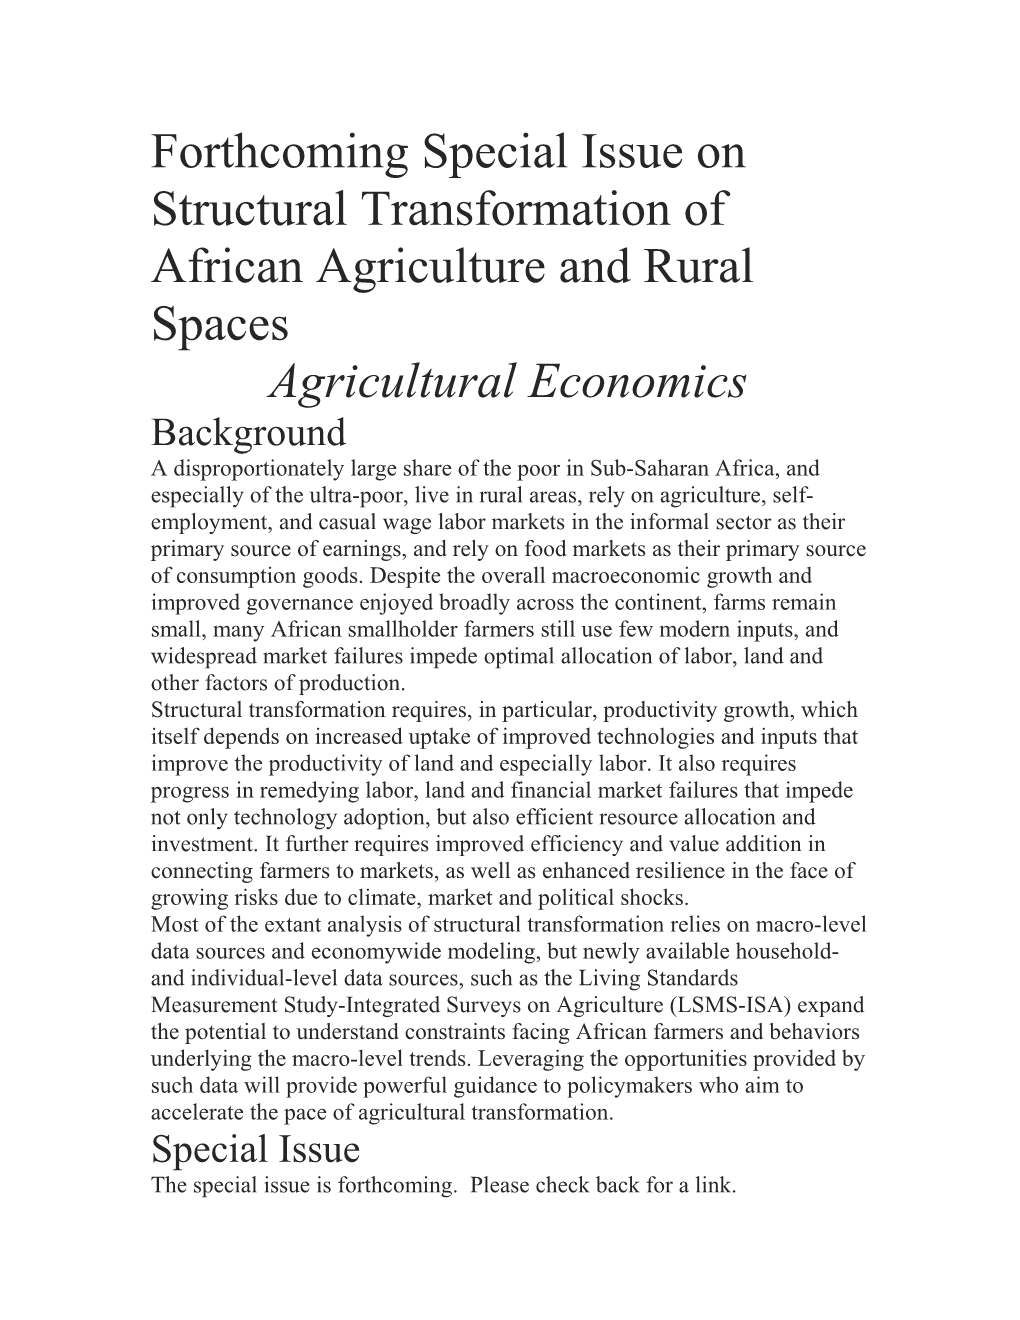 Forthcoming Special Issue on Structural Transformation of African Agriculture and Rural Spaces